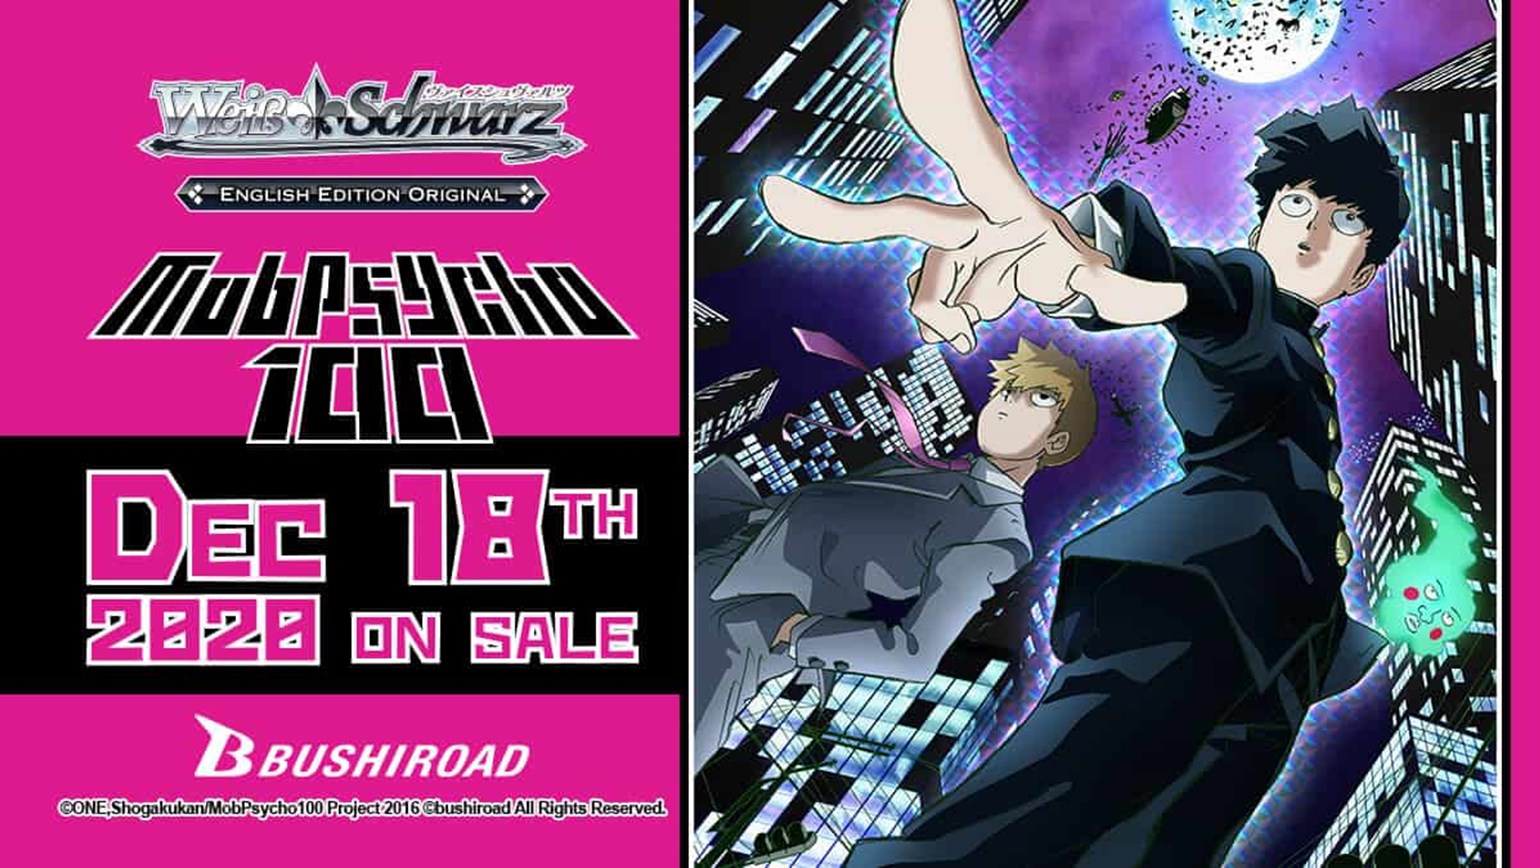 Weiss Schwarz: Mob Psycho 100 Hits Your FLGS Shelves December 18th!